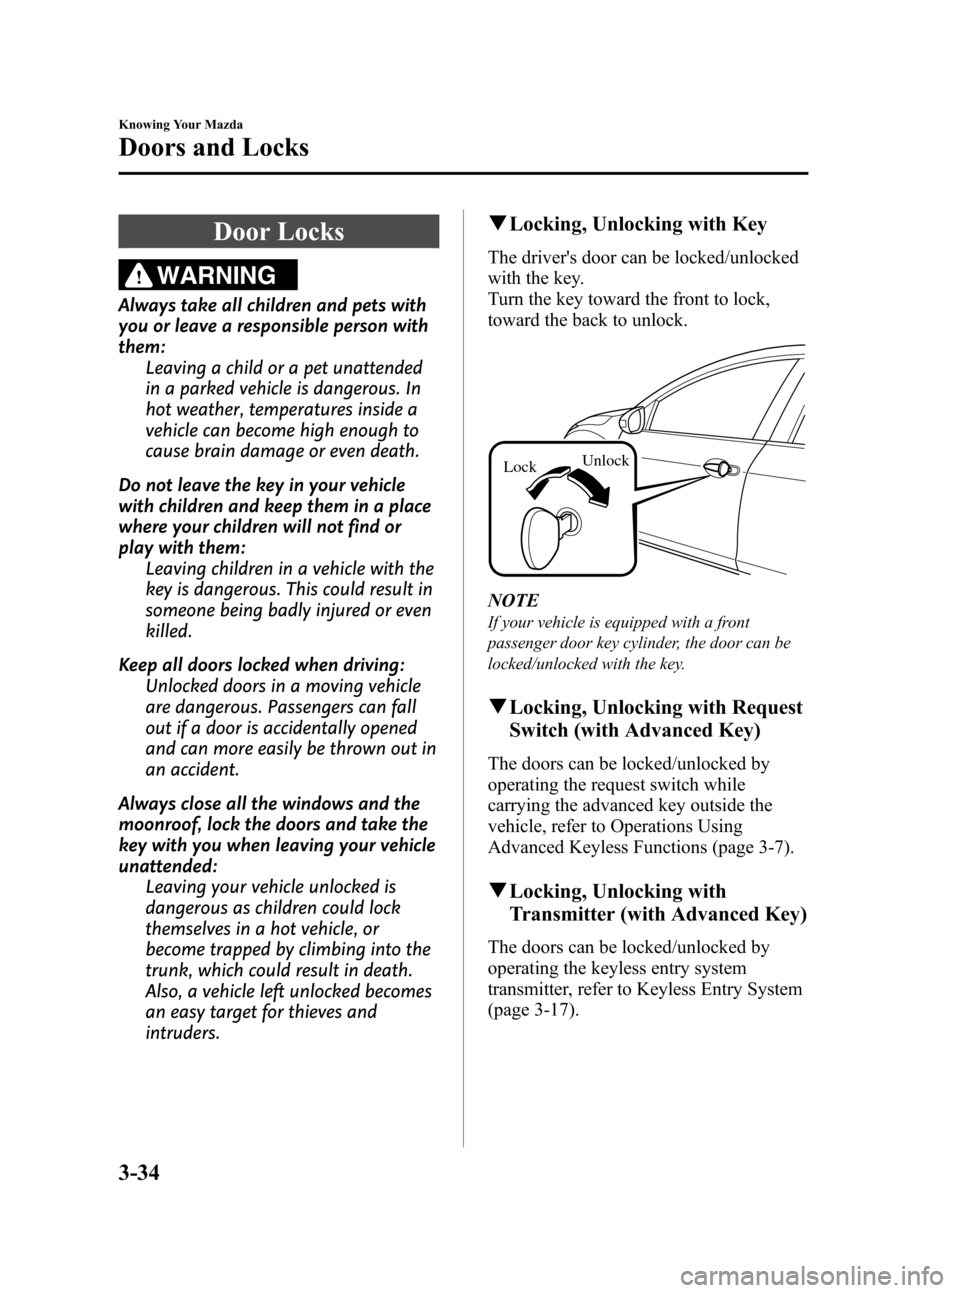 MAZDA MODEL 3 HATCHBACK 2010  Owners Manual (in English) Black plate (110,1)
Door Locks
WARNING
Always take all children and pets with
you or leave a responsible person with
them:
Leaving a child or a pet unattended
in a parked vehicle is dangerous. In
hot 